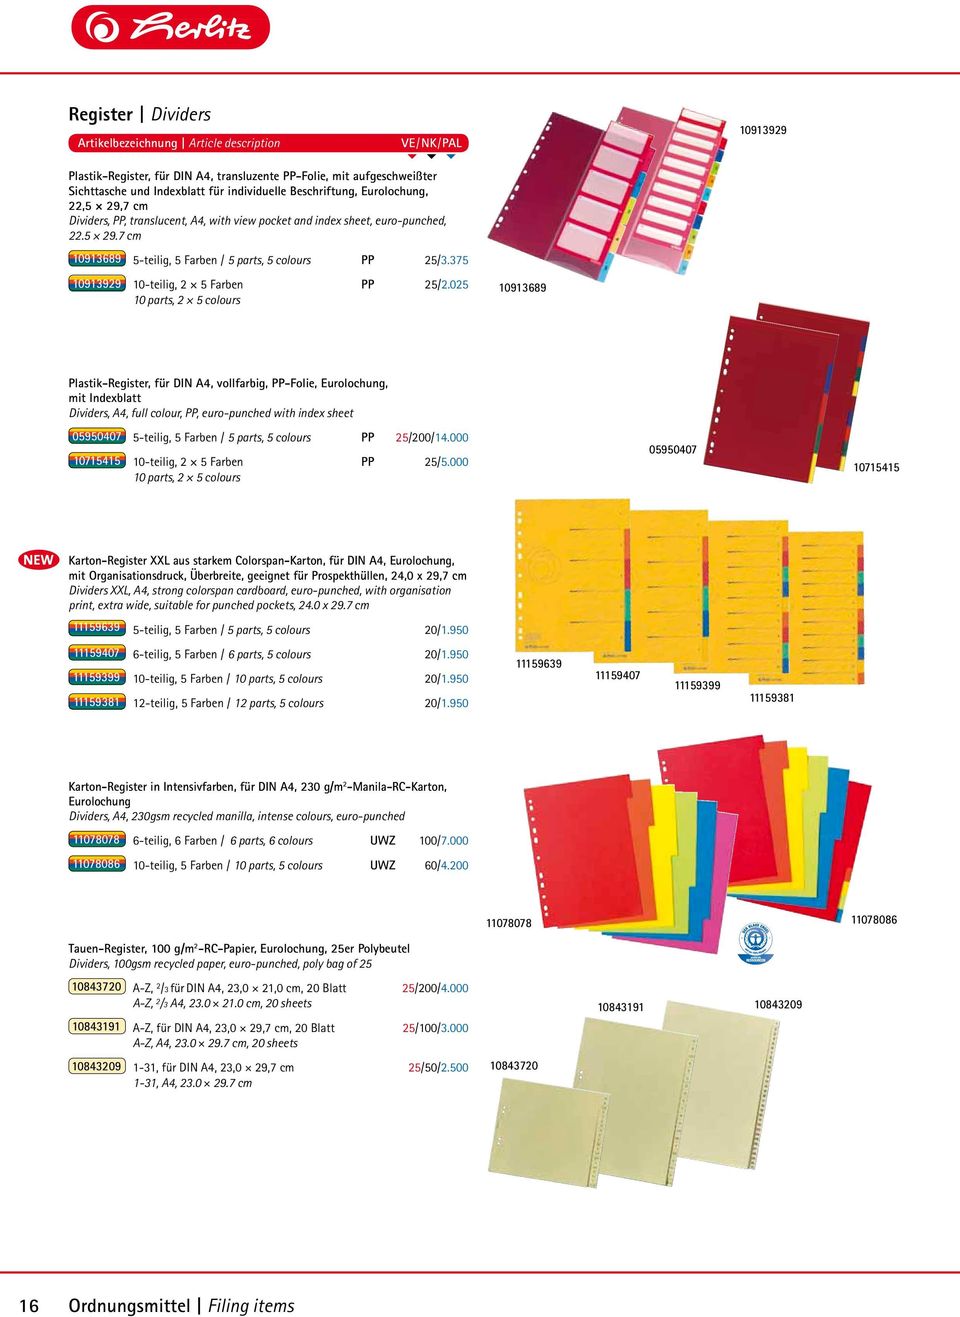 025 10 parts, 2 5 colours 10913689 Plastik-Register, für DIN A4, vollfarbig, PP-Folie, Eurolochung, mit Indexblatt Dividers, A4, full colour, PP, euro-punched with index sheet 05950407 5-teilig, 5